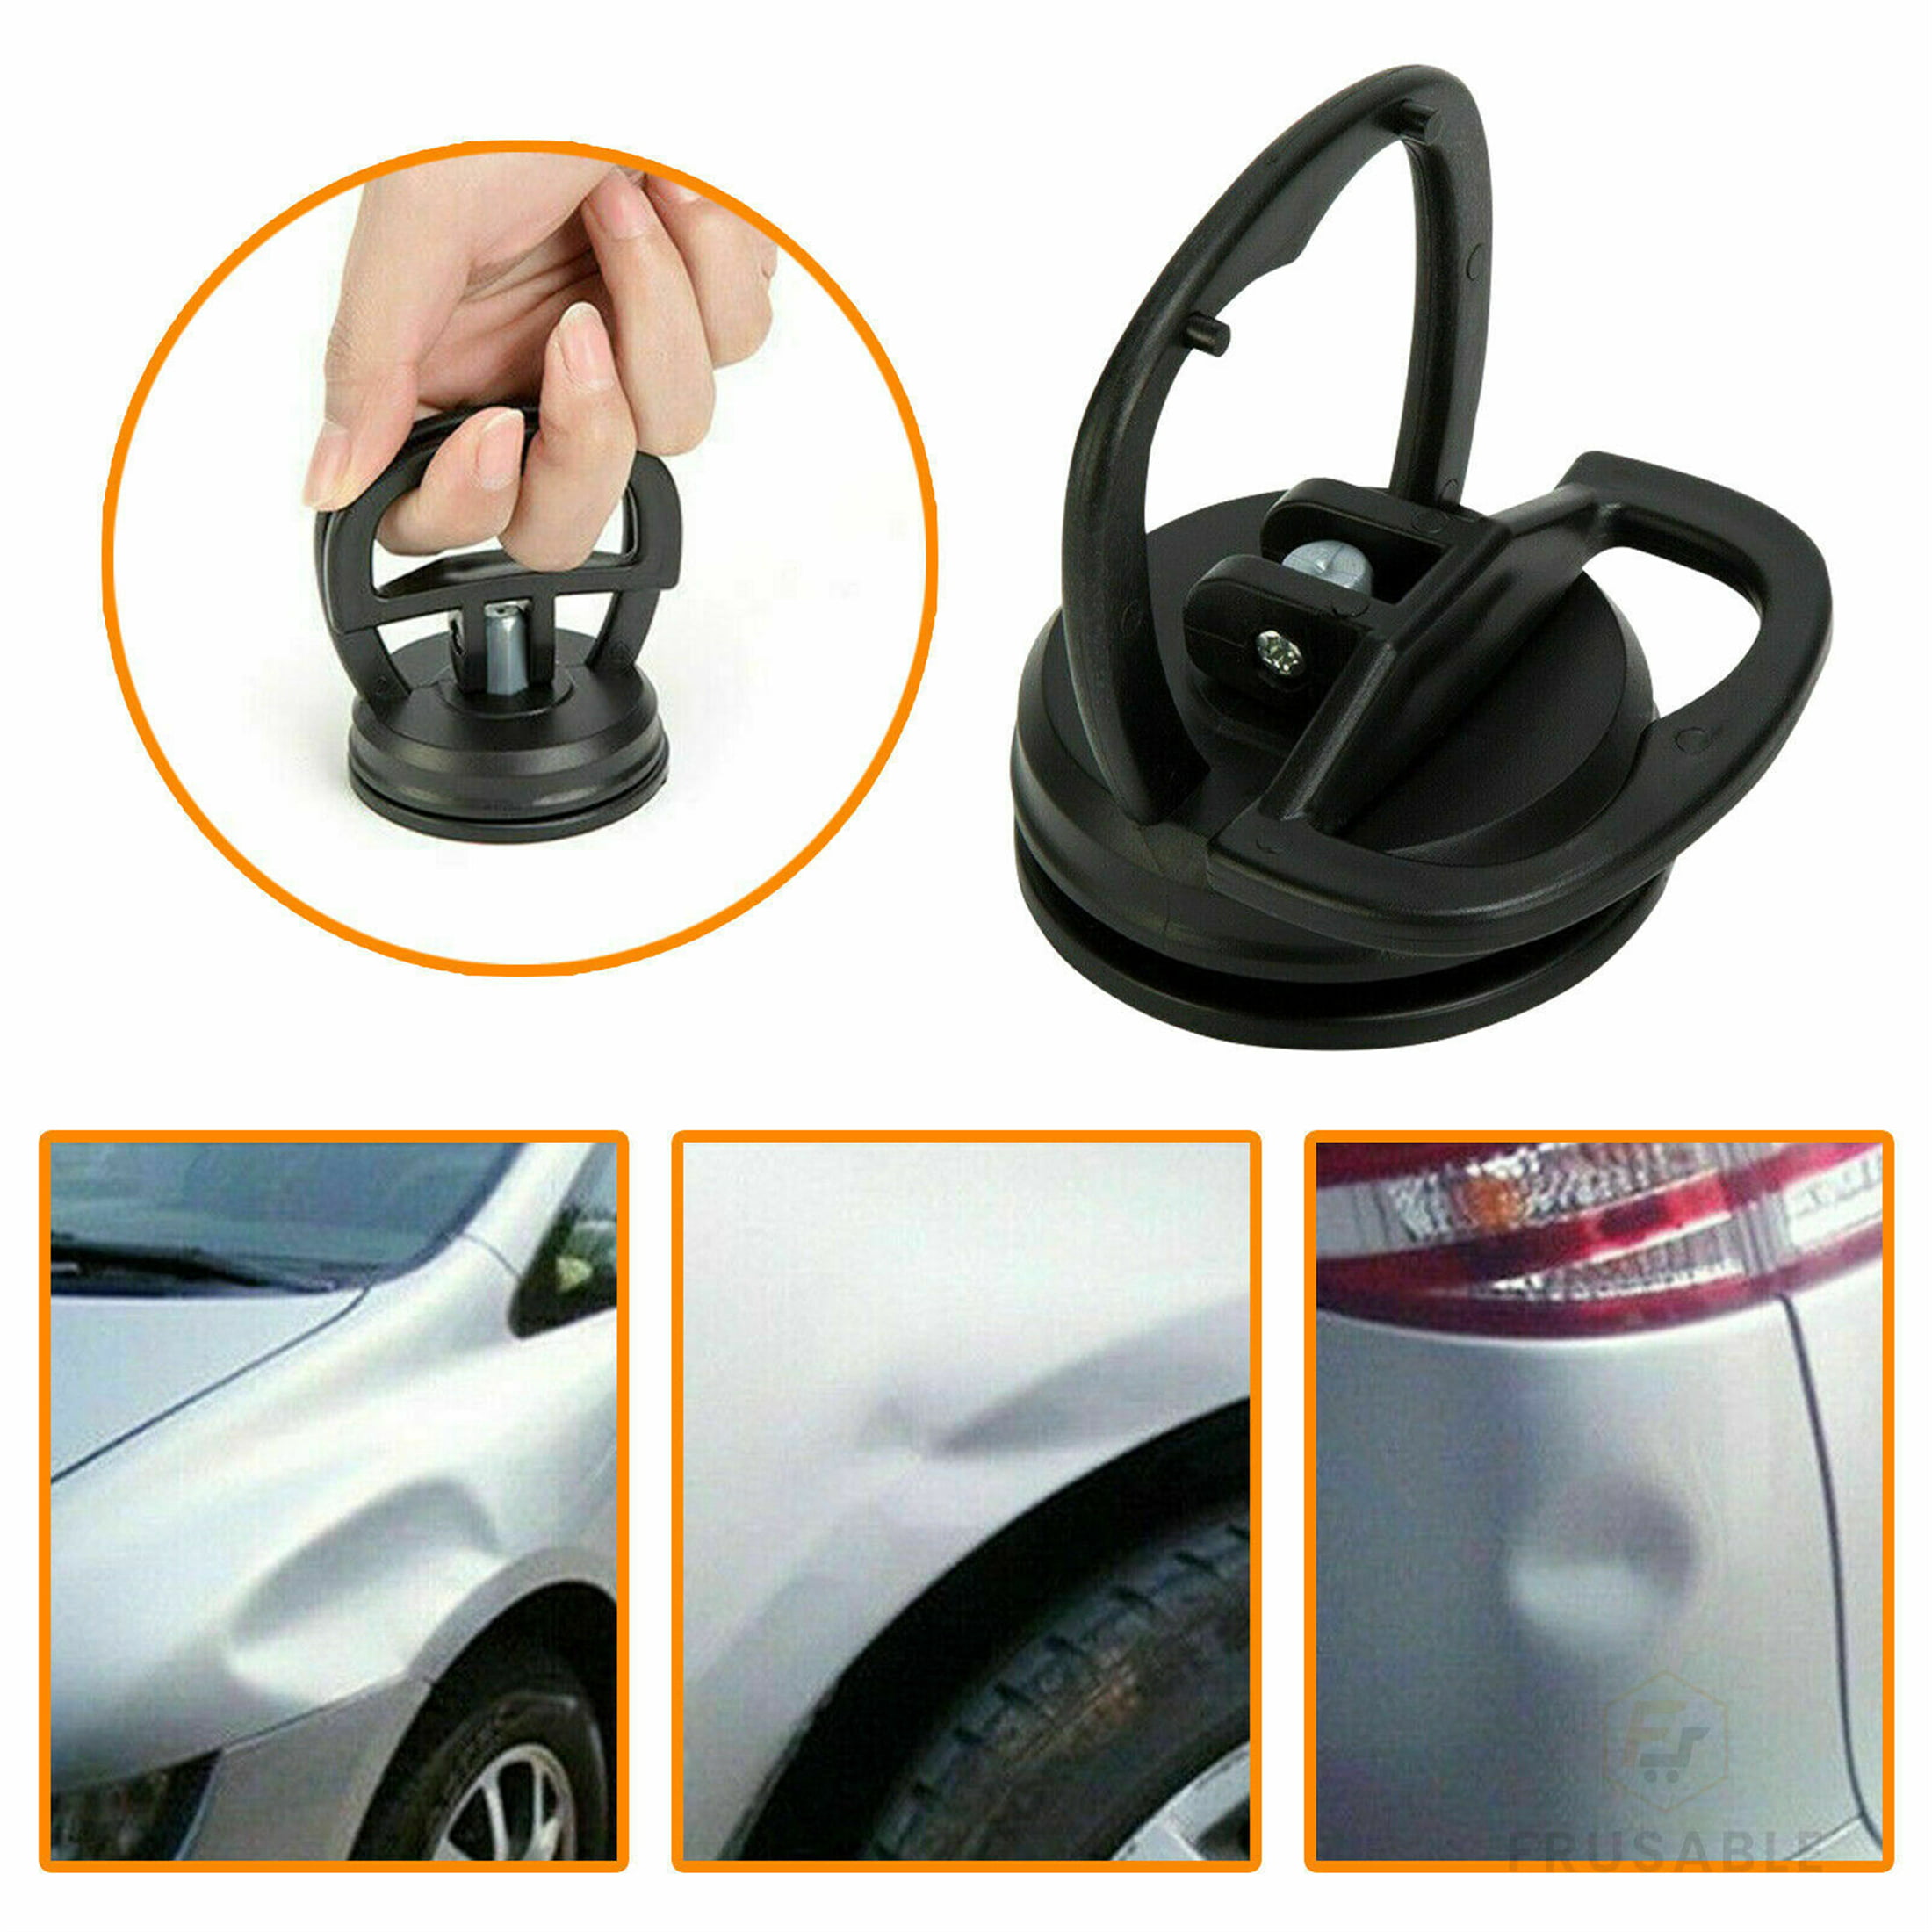 Details about   Car Puller Dent Lifte Repair Puller Sucker Bodywork Panel Suction Cup Tool 